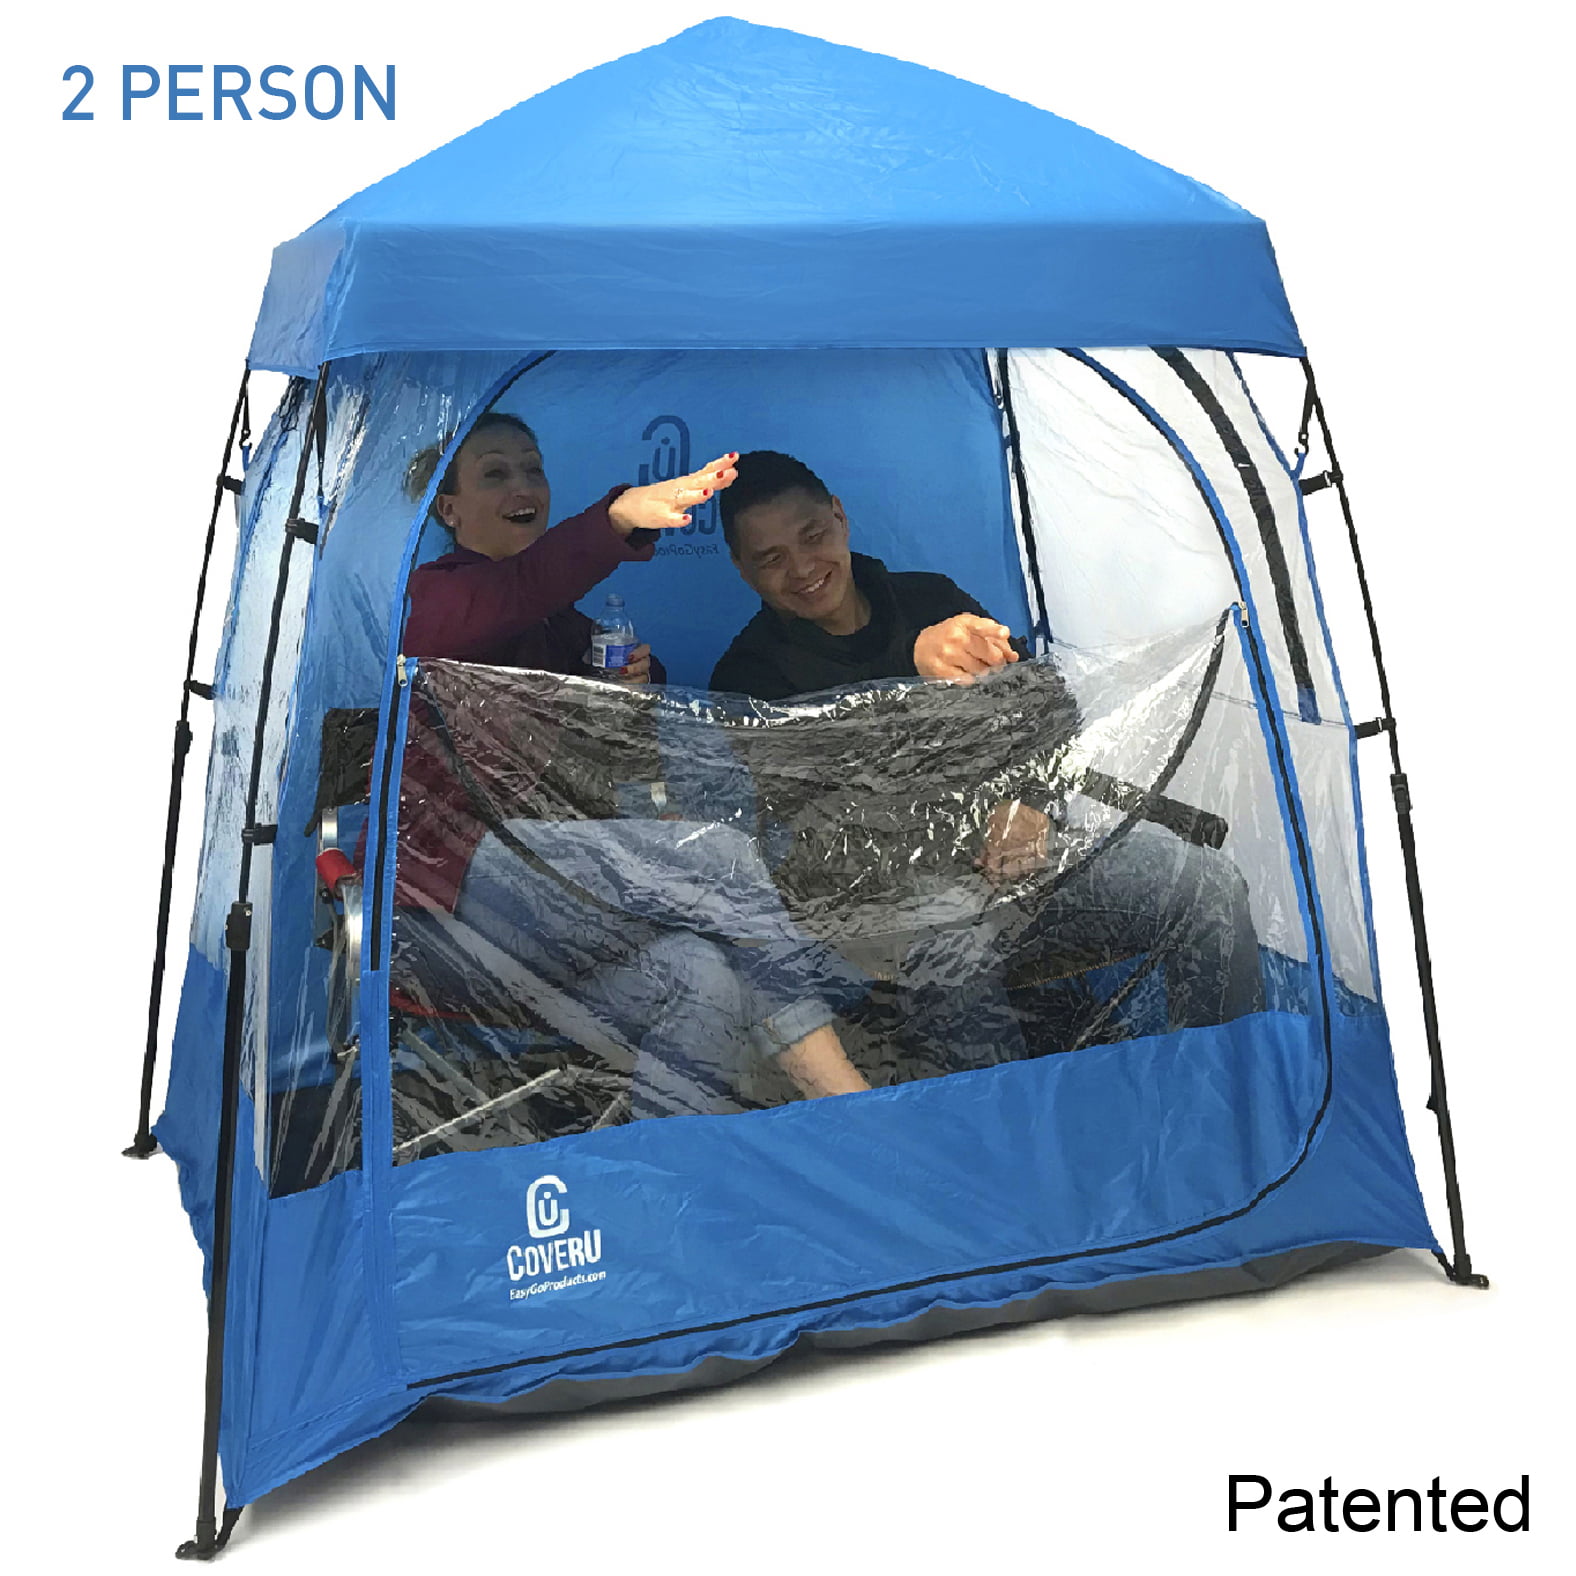 Under The Weather XL Instapod Pop-up Sports Pod w/Carry Case & Stakes Included 